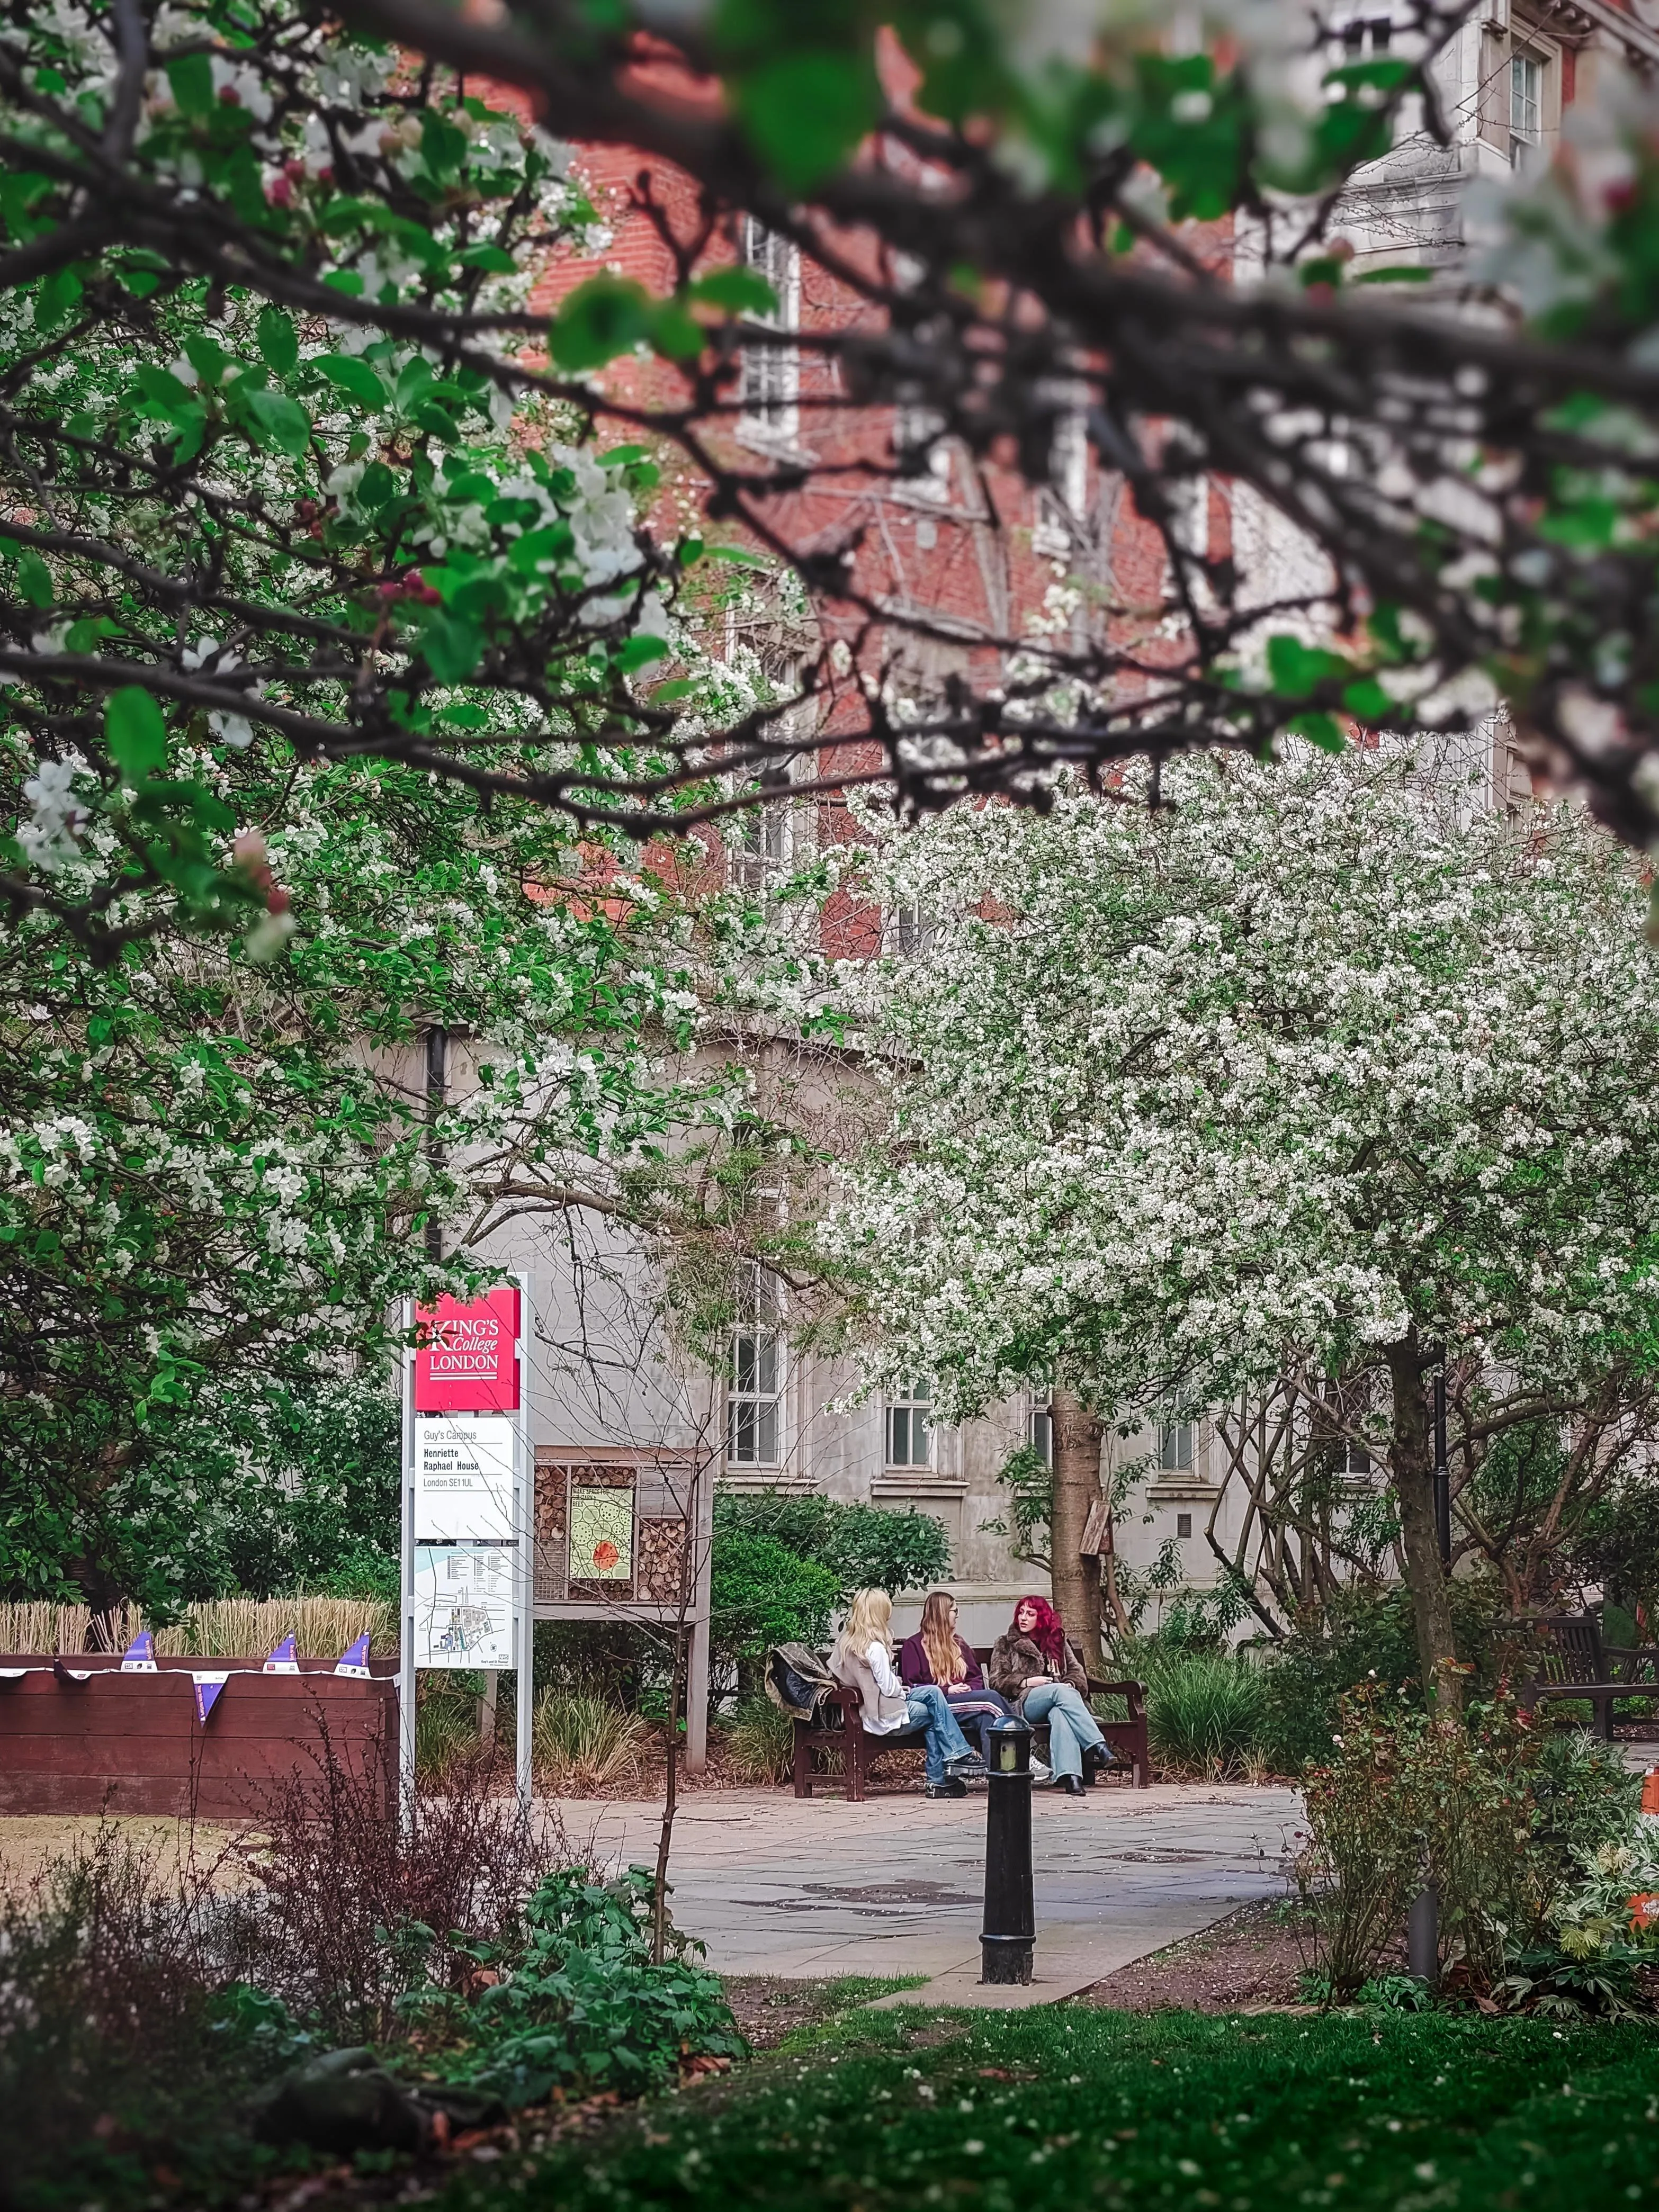 King's College London students sit on a bench in front of a building on Guy's Campus, they are framed by blossoming trees.